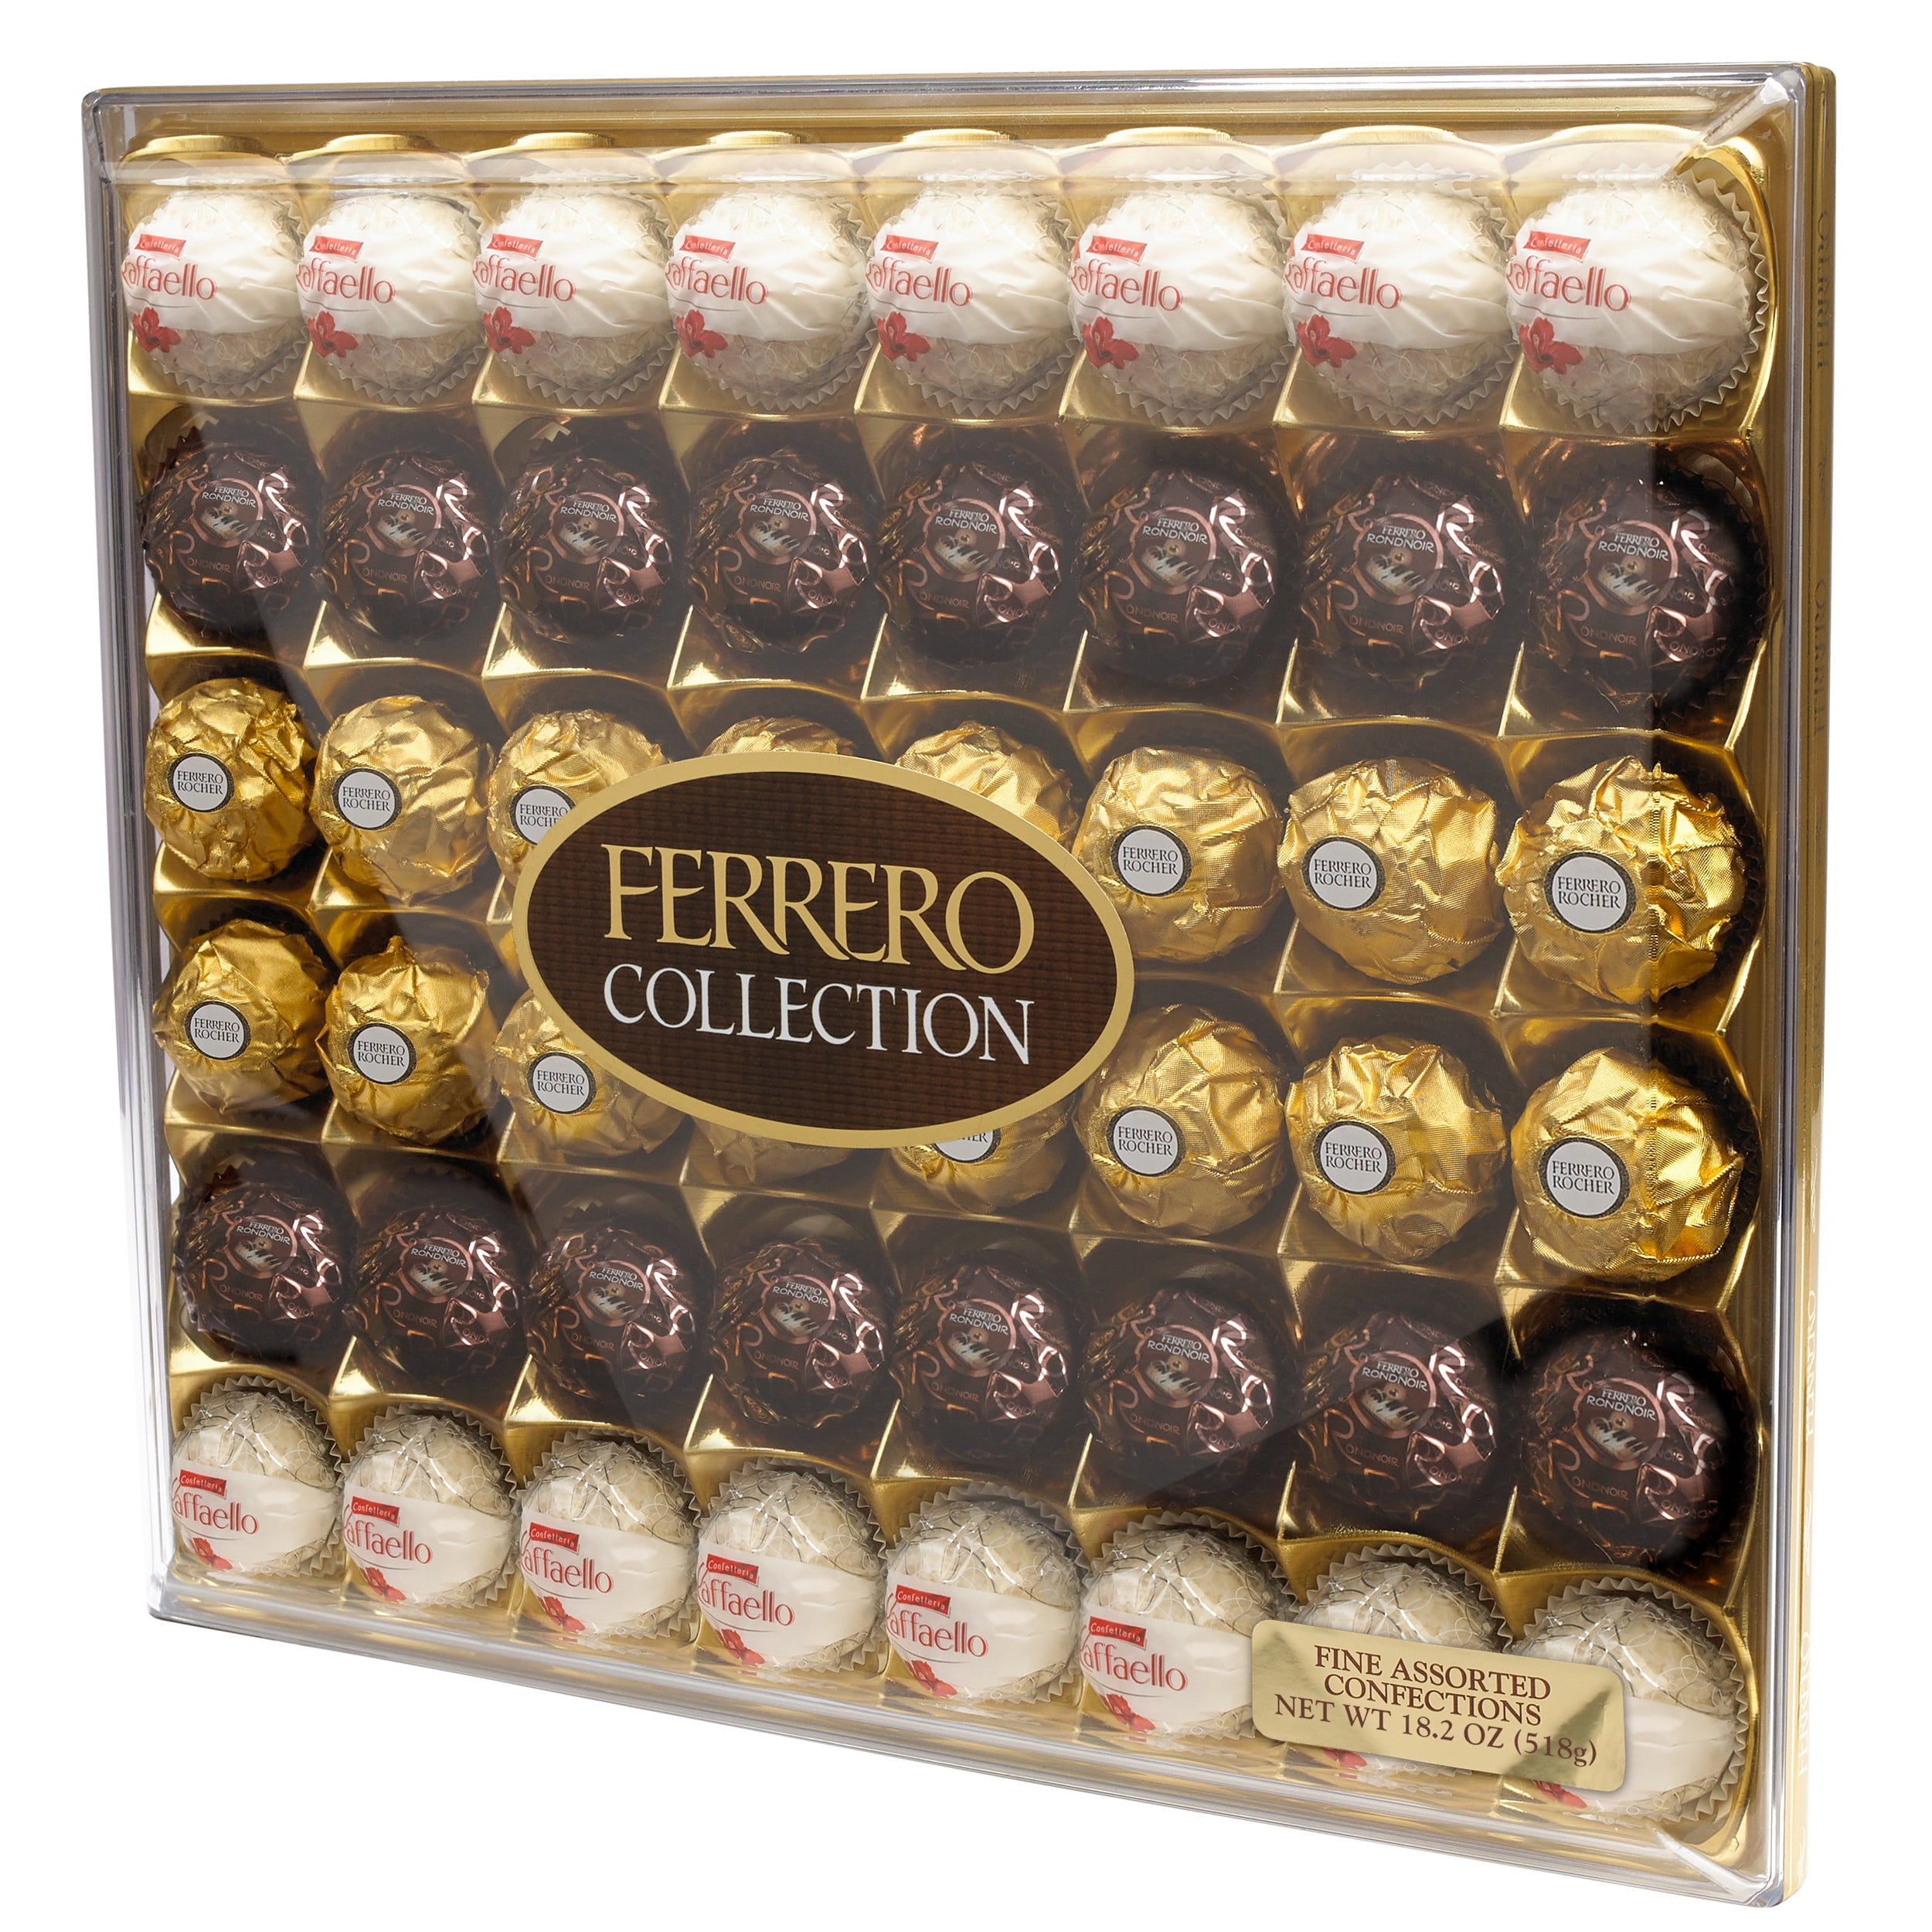 oz Premium 48 Ferrero Chocolate, Assorted Great 18.2 Chocolate Gift, Collection Coconut, Easter Count) Hazelnut Milk A Gourmet and Dark